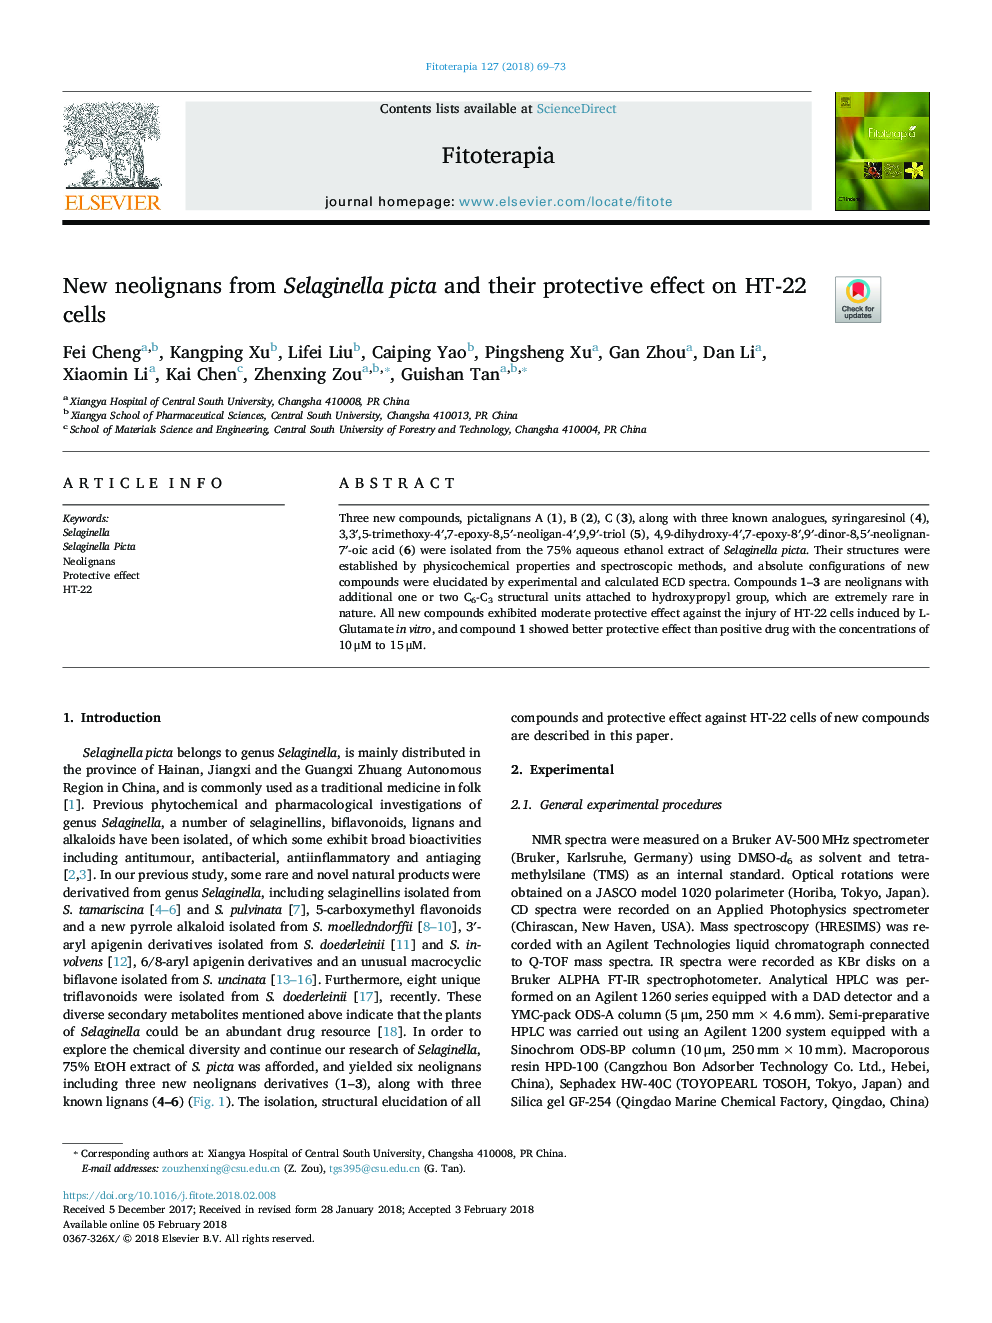 New neolignans from Selaginella picta and their protective effect on HT-22 cells